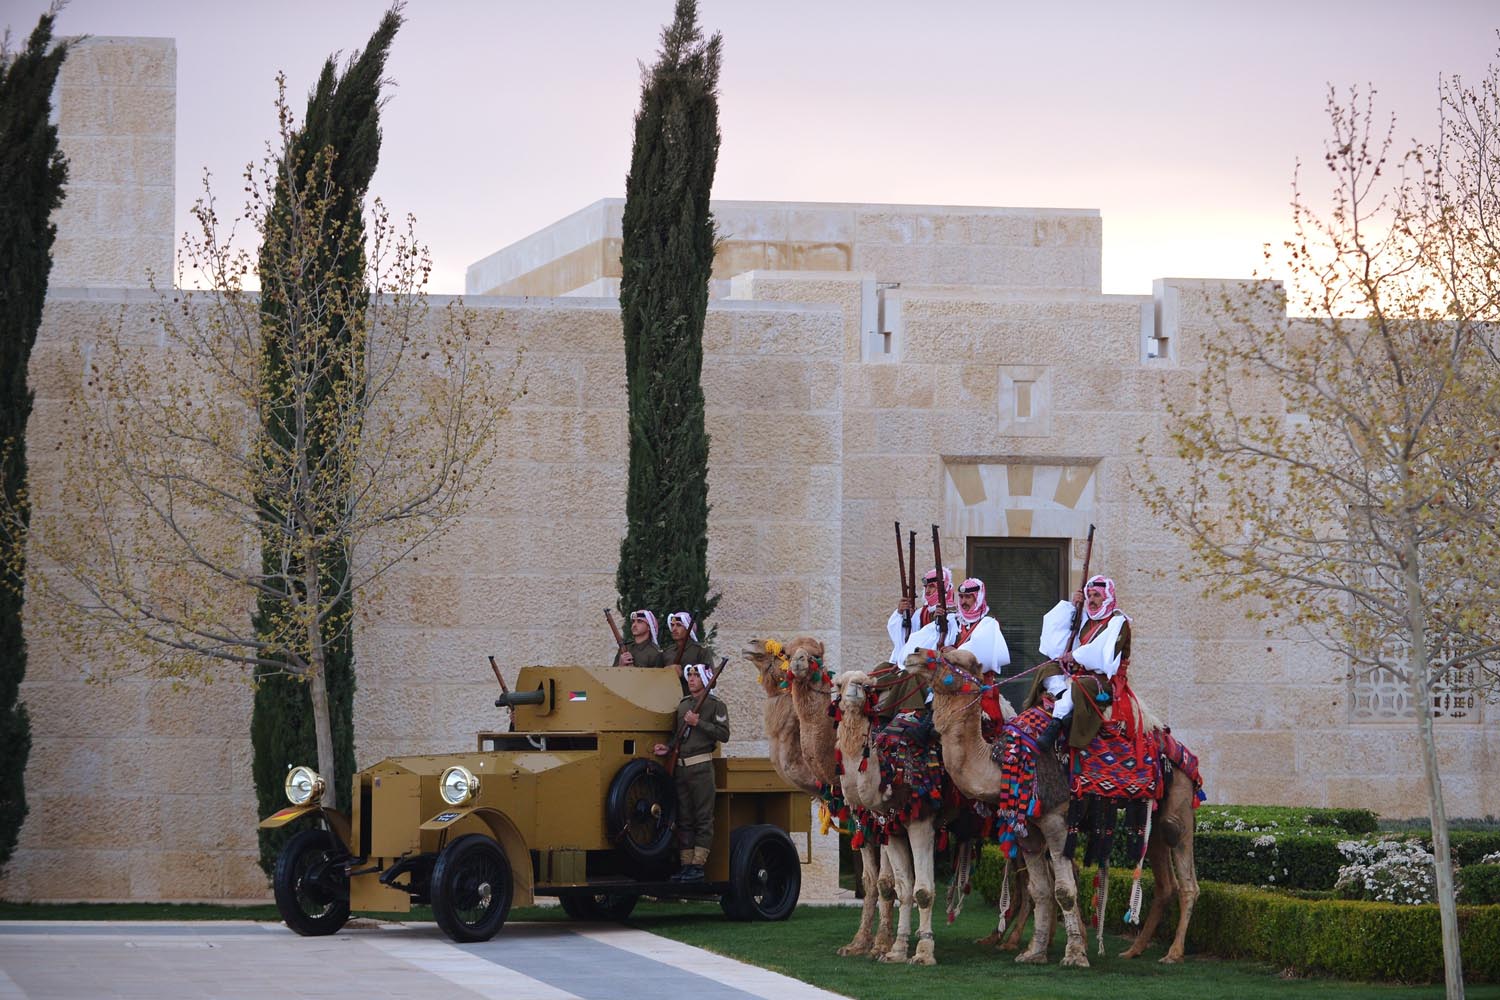 March 22, 2013. Honour guard sit on camels near an antique amoured personnel carrier during a welcome ceremony for the arrival of US President at Al-Hummar Palace in the Jordanian capital Amman.